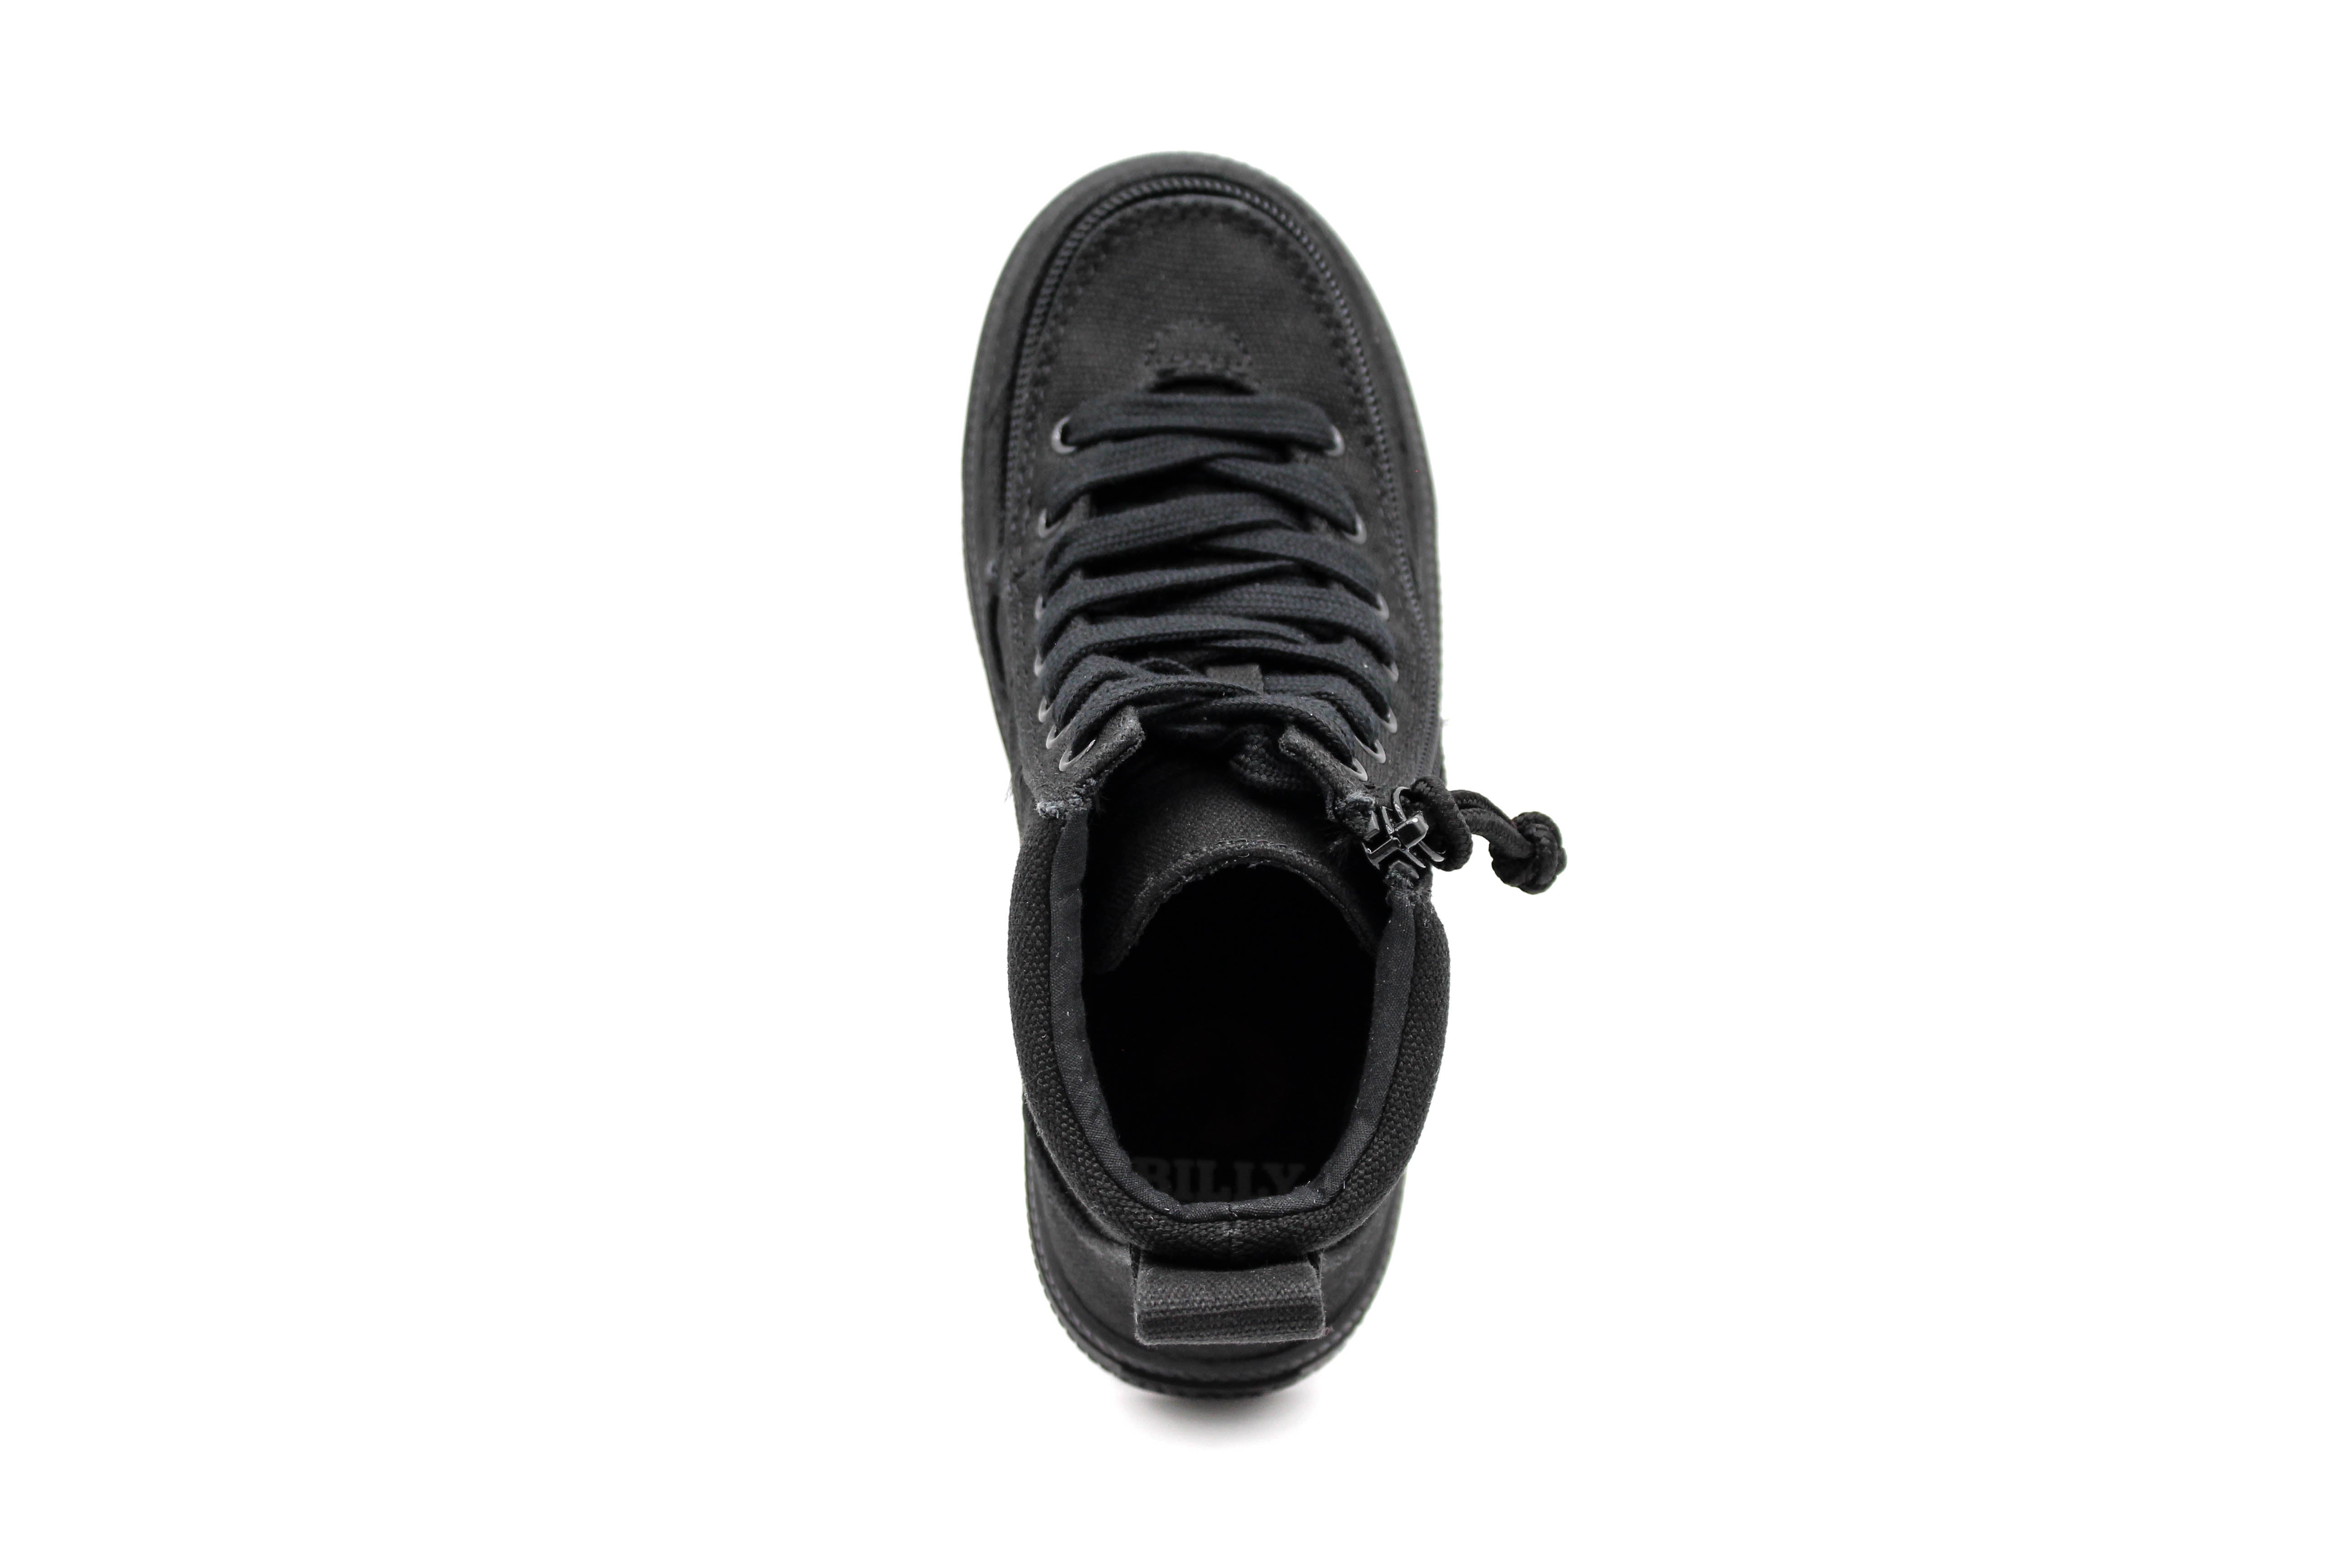 BILLY Black to the Floor Canvas Classic Lace High Tops